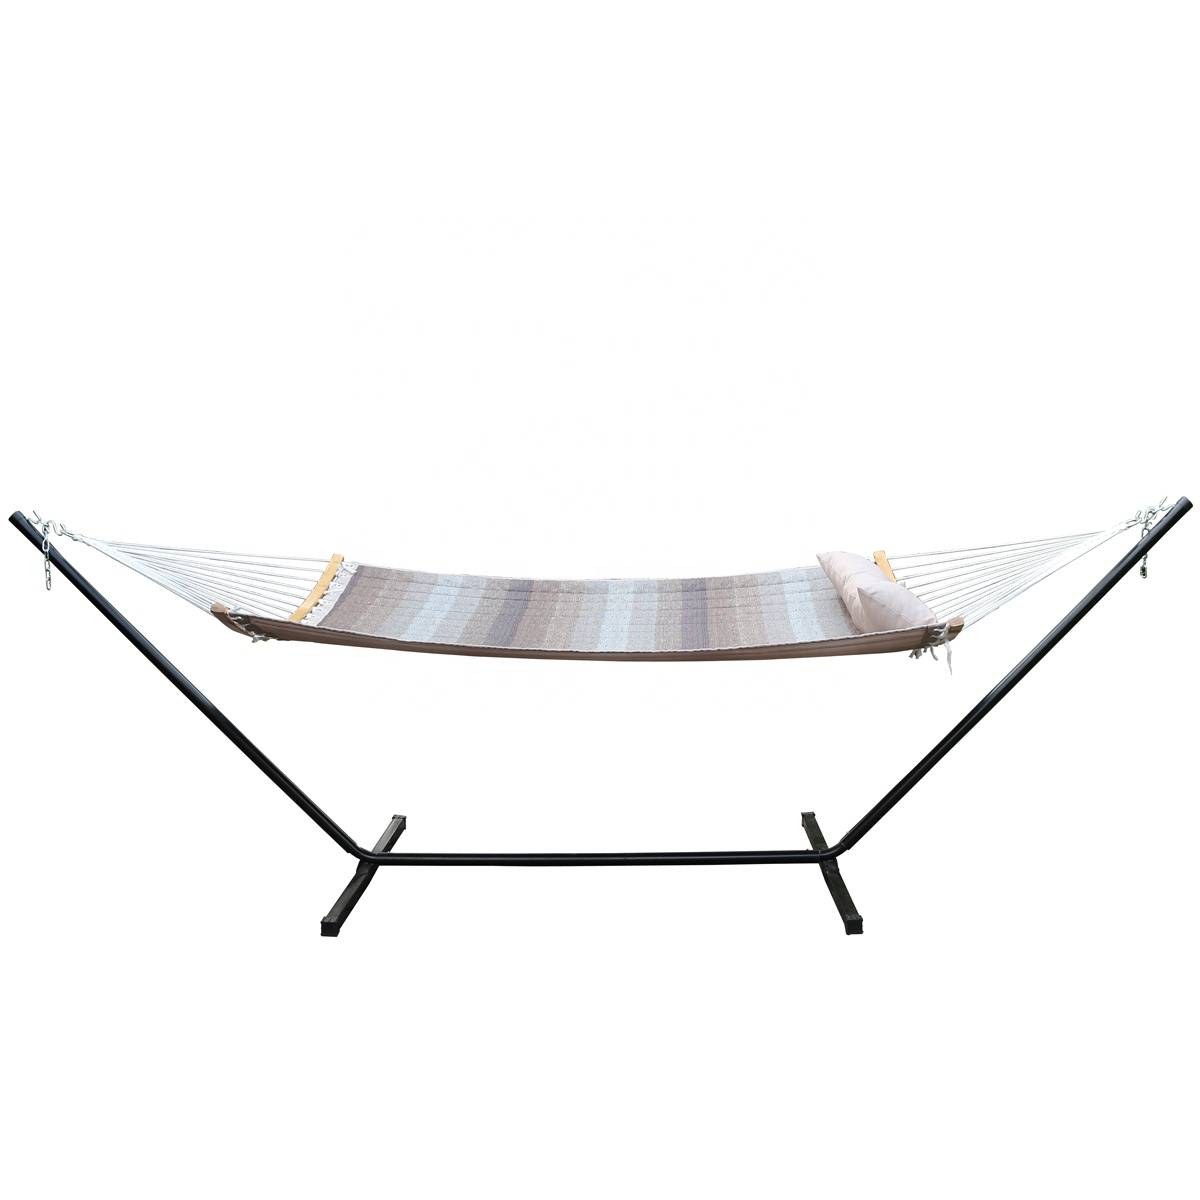 Professional China Hammock Stand - Folding Curved  Bar Portable Hammock with Pillow and Carry Bag Hammock Swing Camping Hammocks – Top Asian